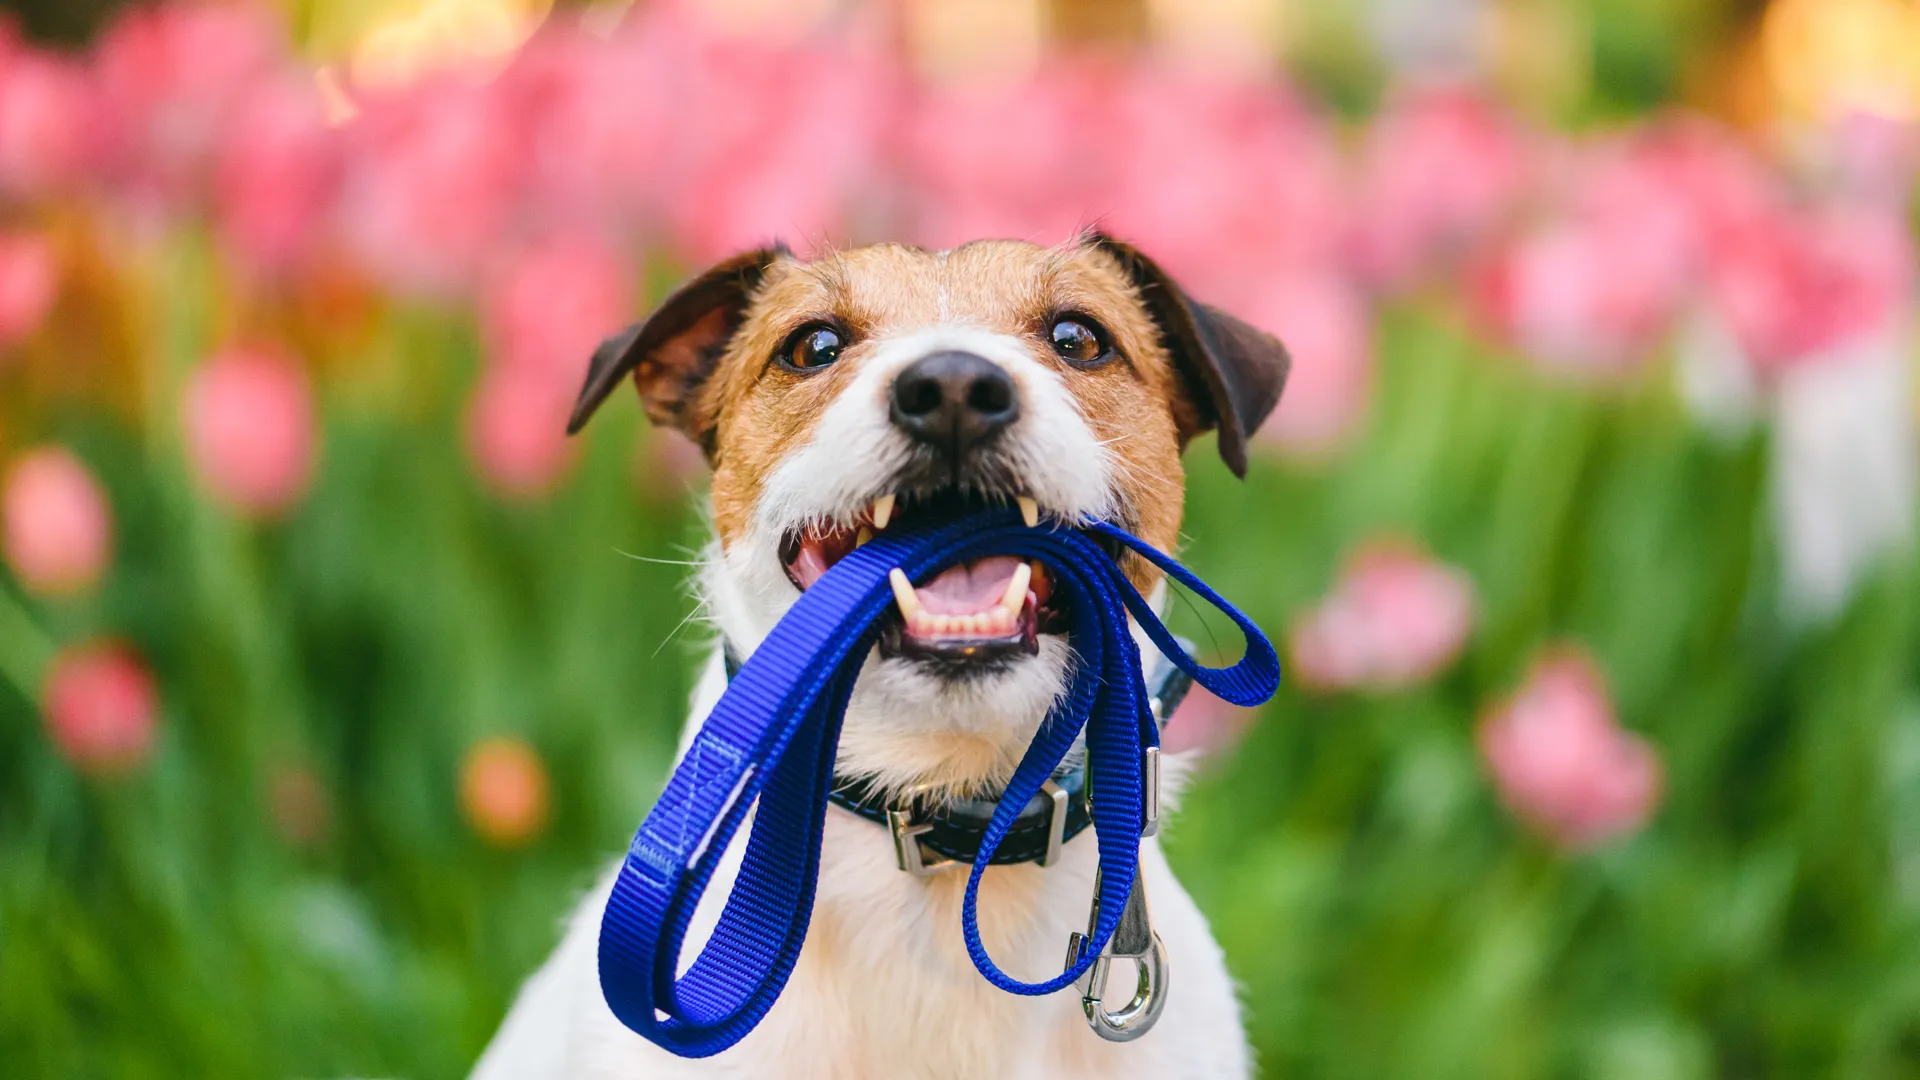 Jack Russell Terrier holding leash with colorful flower bed at background.